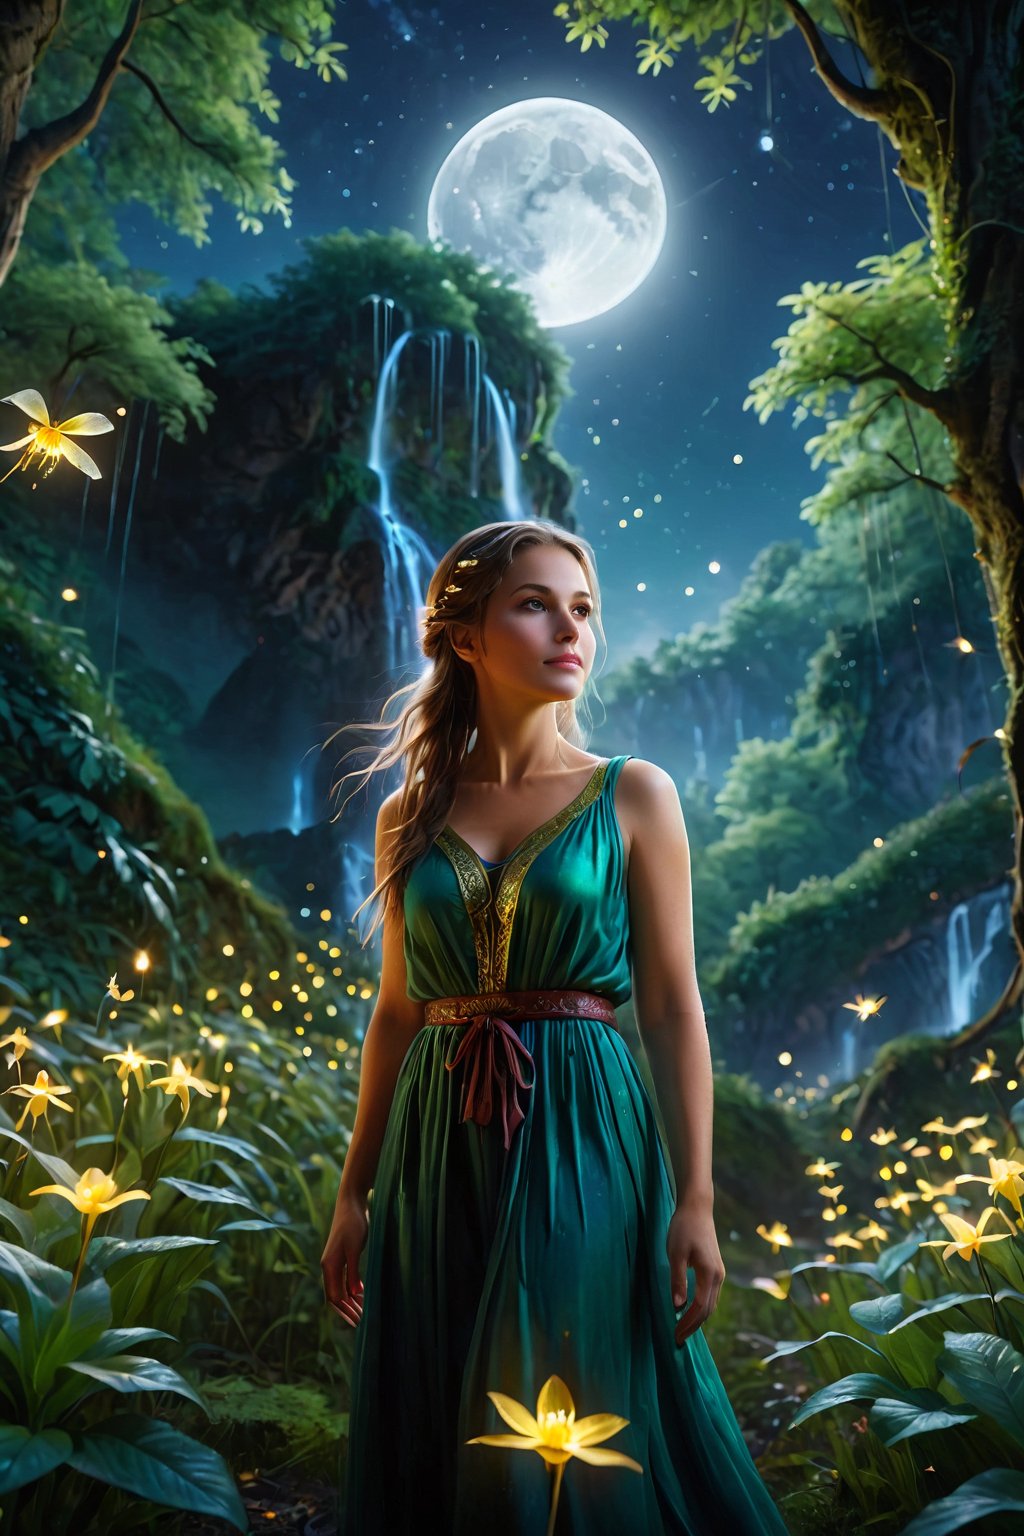 score_9, score_8_up, score_7_up, score_6_up, 
Magic Forest, Night sky, moon, fireflies, waterfalls, magic elves,
(Masterpiece, Best Quality, 8k:1.2), (Ultra-Detailed, Highres, Extremely Detailed, Absurdres, Incredibly Absurdres, Huge Filesize:1.1), (Photorealistic:1.3), By Futurevolab, Portrait, Ultra-Realistic Illustration, Digital Painting. ,Strong Backlit Particles